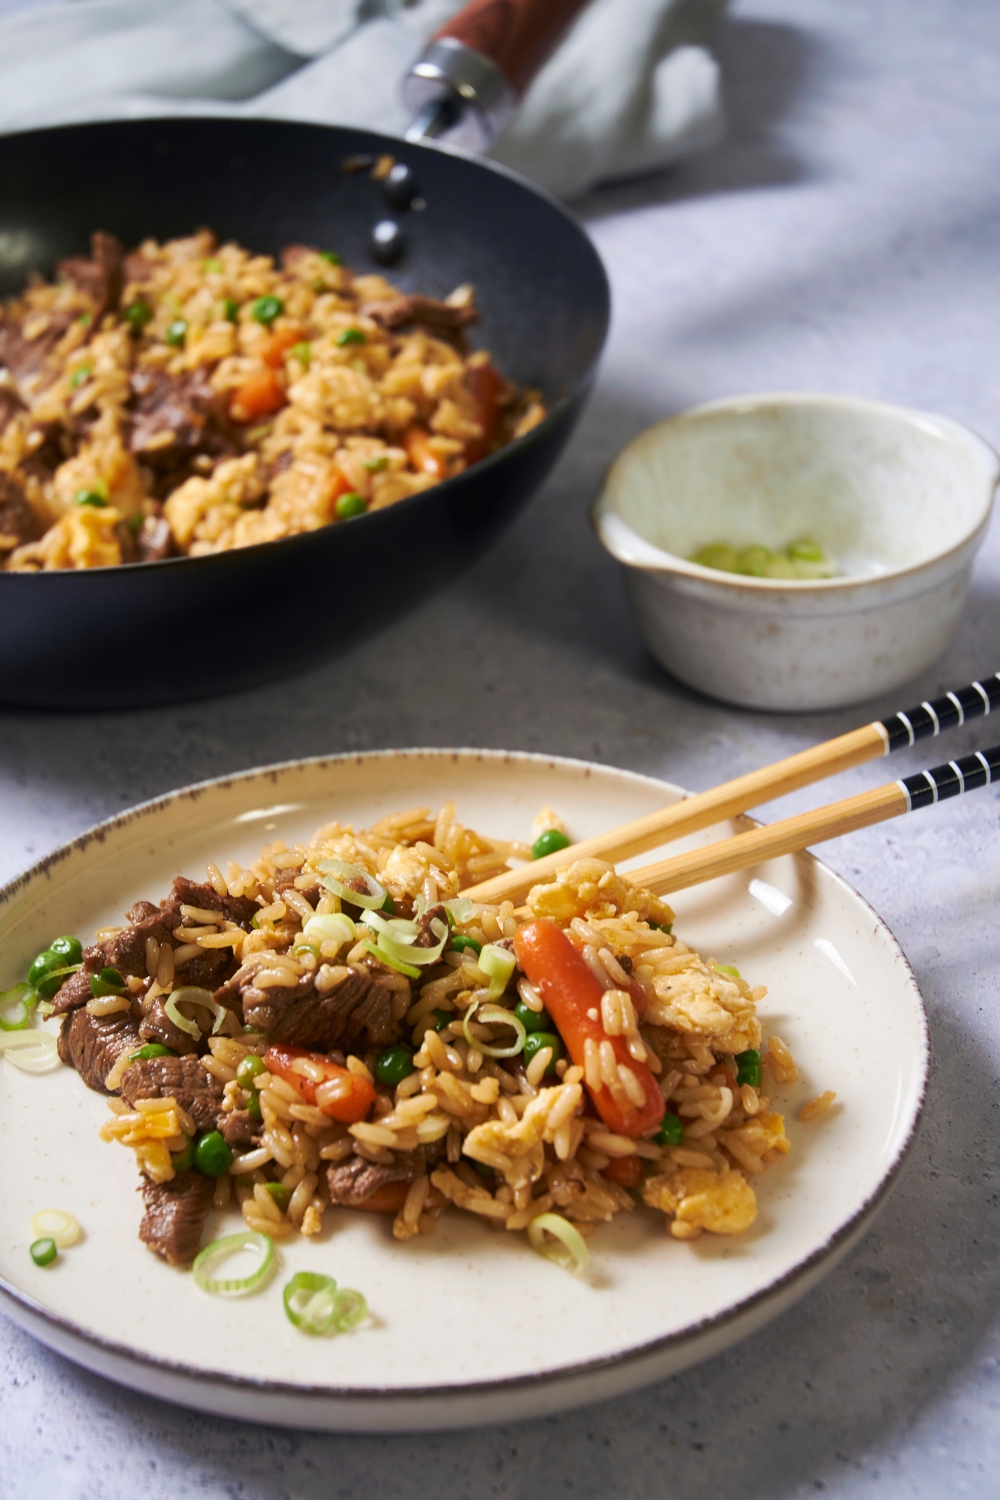 A white plate with beef fried rice and chopsticks on the plate. Behind the plate there is a small bowl of scallions and a black skillet filled with fried rice.